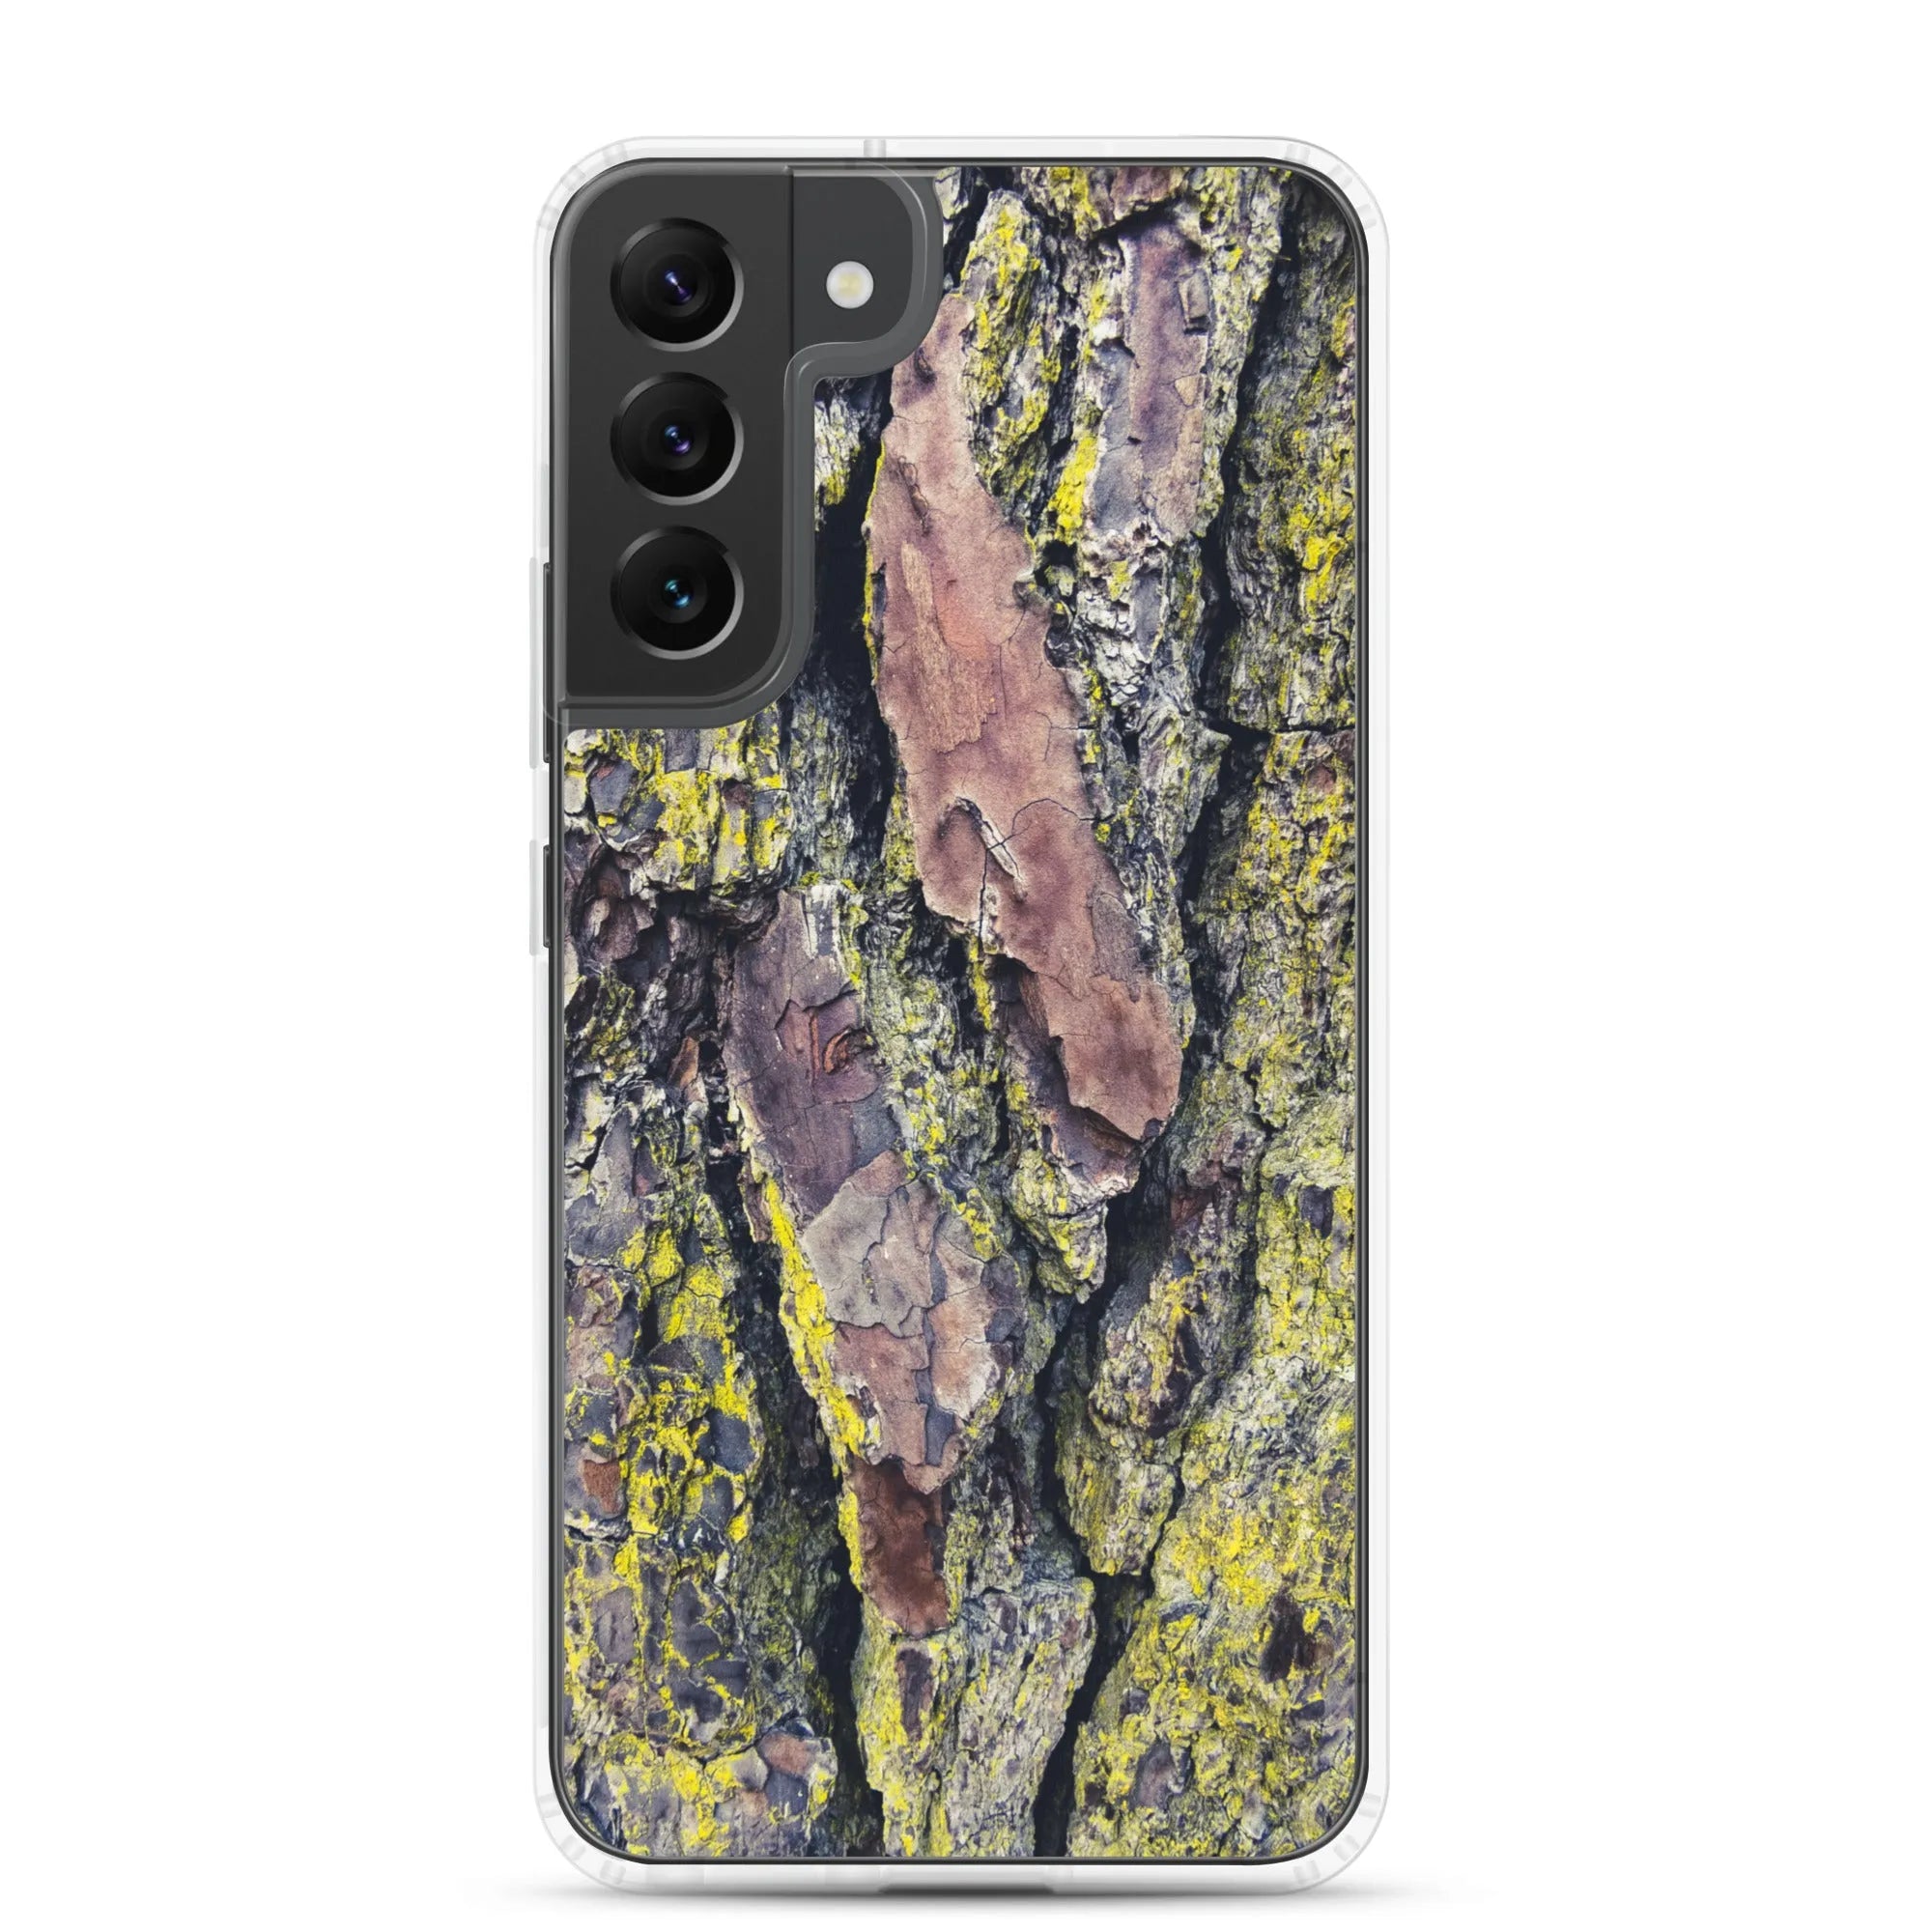 Barking Mad 2 + Too Samsung Galaxy Case - Samsung Galaxy S22 Plus - Mobile Phone Cases - Aesthetic Art